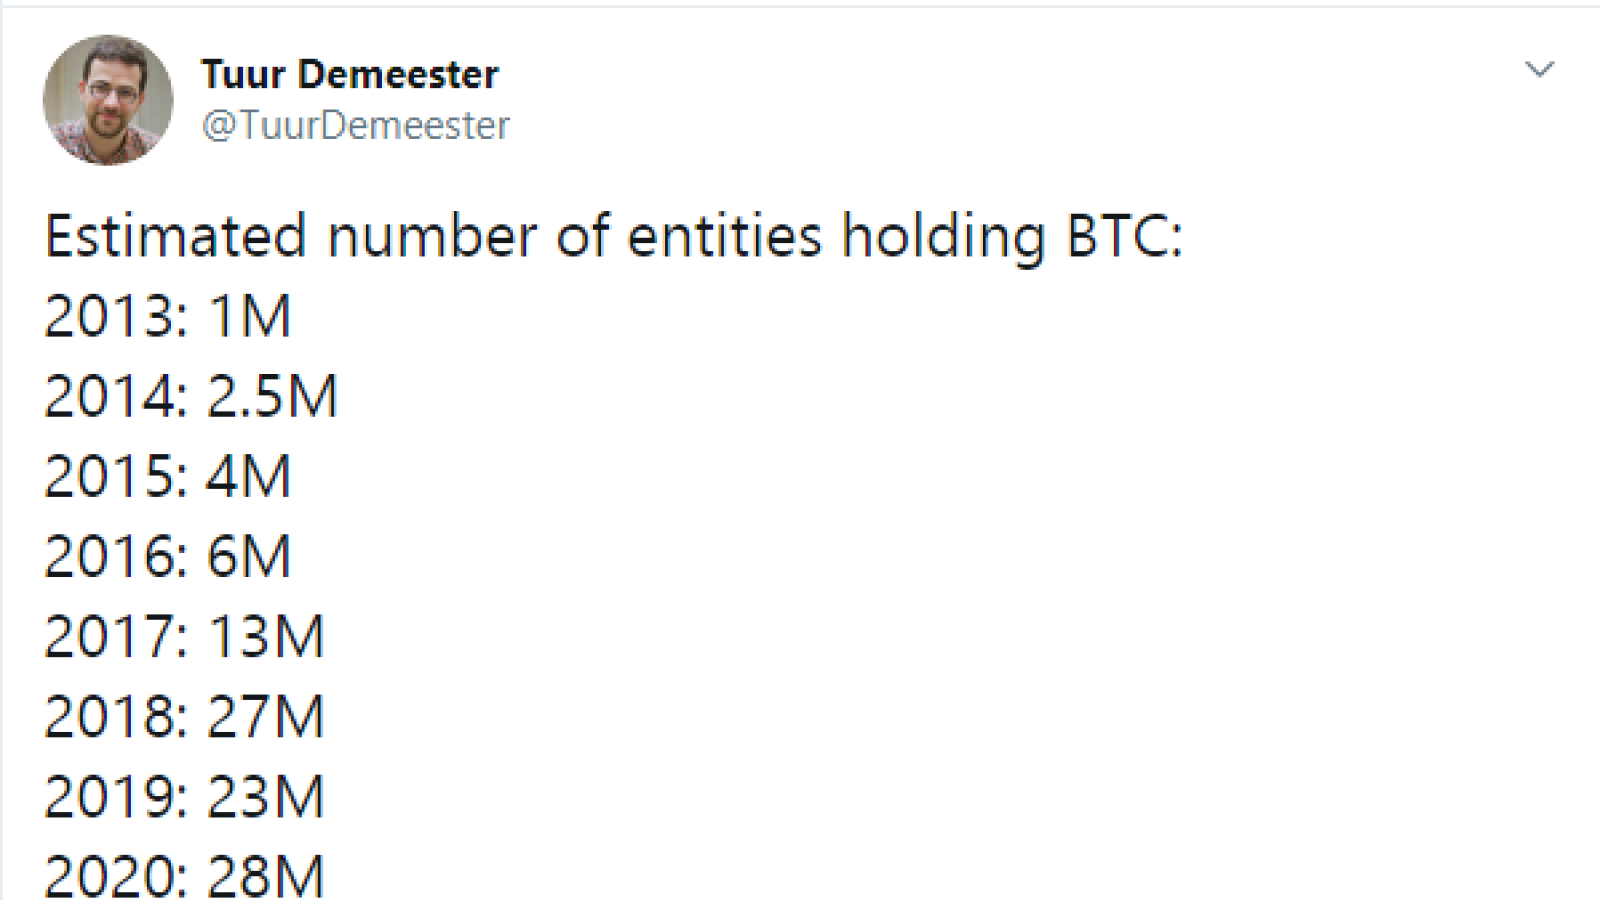 The number of entities lolding Bitcoin (BTC) grew 28 times during last 7 years